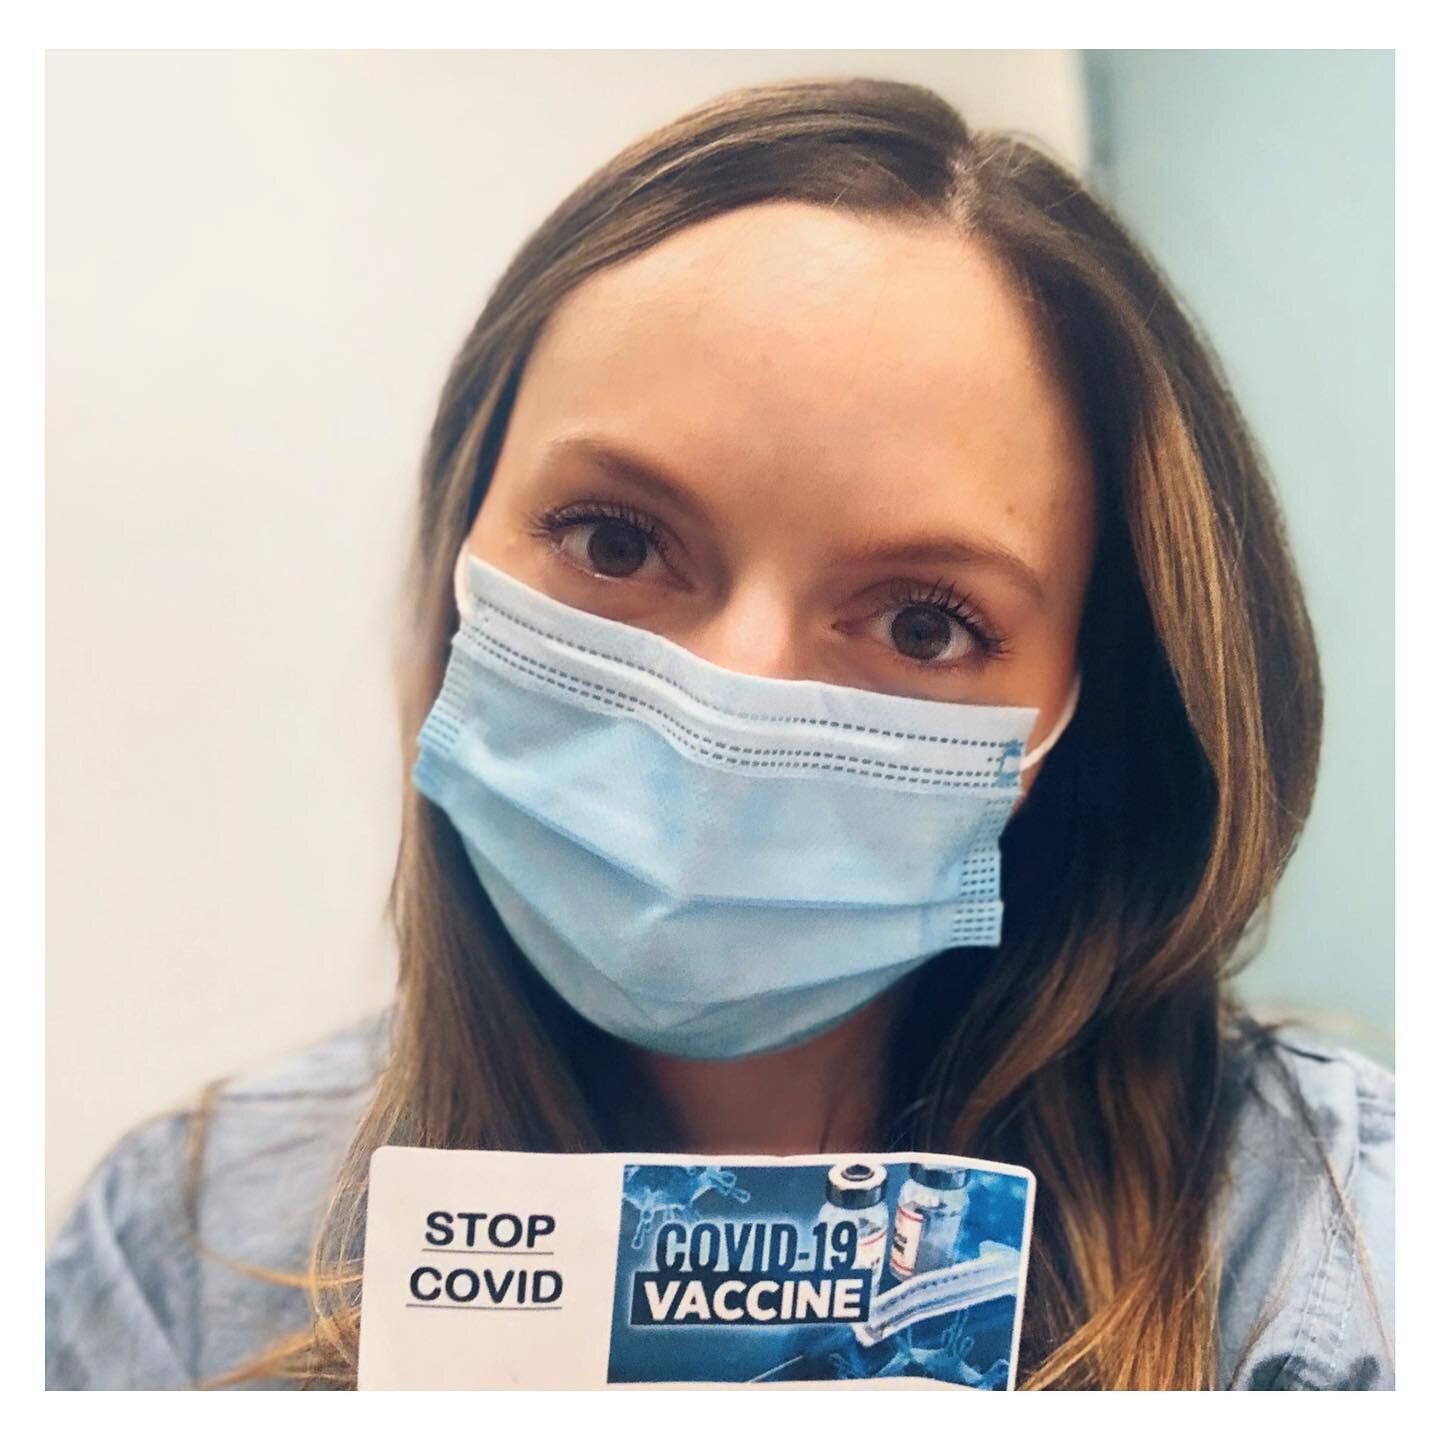 Here&rsquo;s to 2021! Last year was one of the hardest we&rsquo;ve ever faced. I&rsquo;ve received the vaccine in hopes that this will be the start of the turning point we so desperately need. Please continue to do your part by wearing a mask and pra